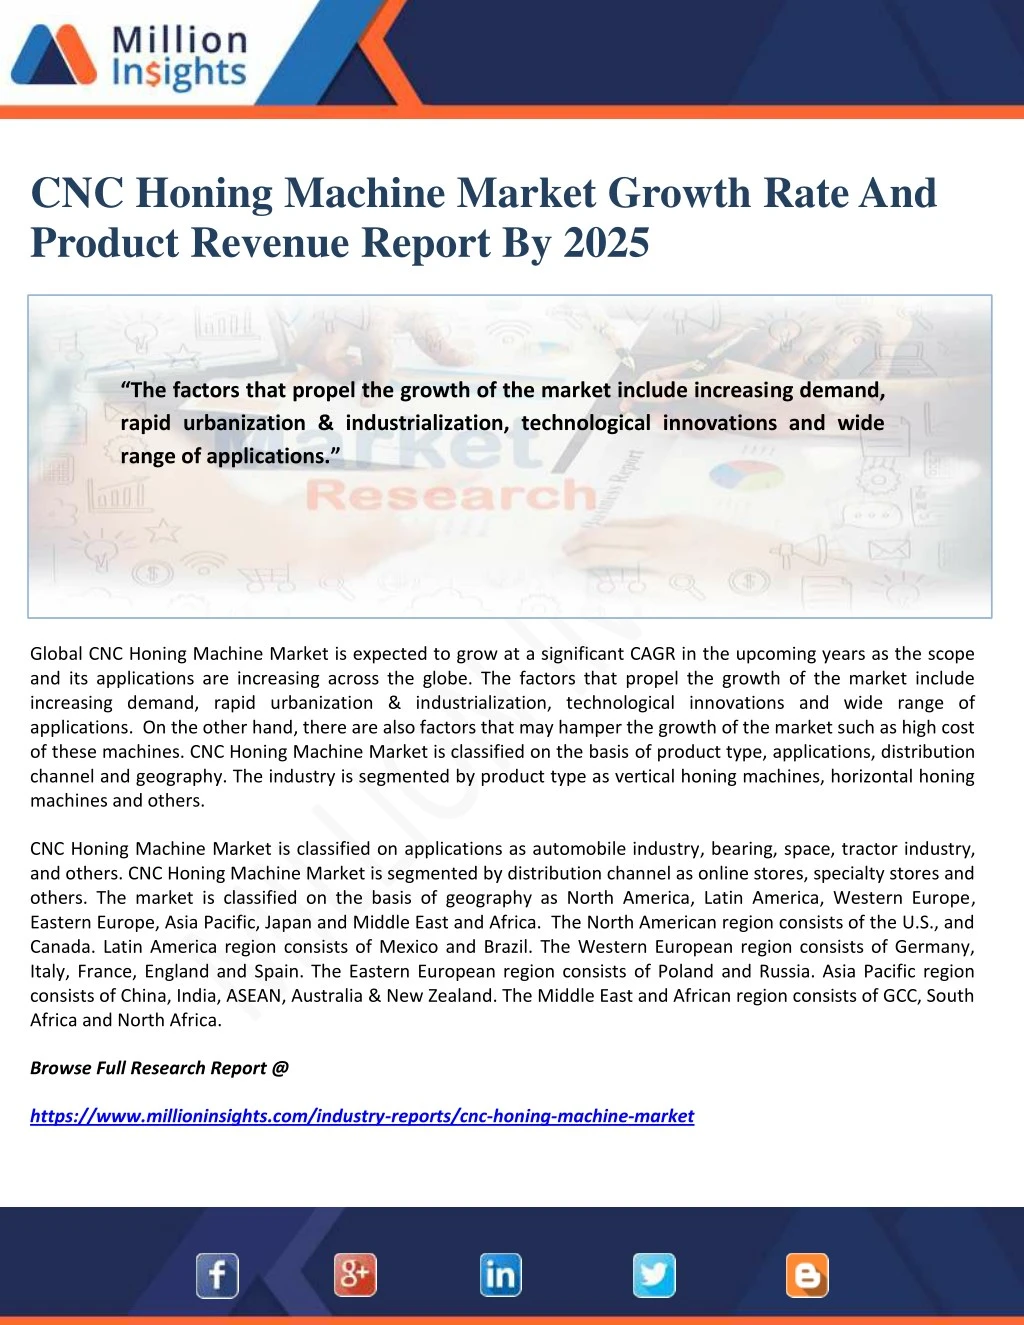 cnc honing machine market growth rate and product